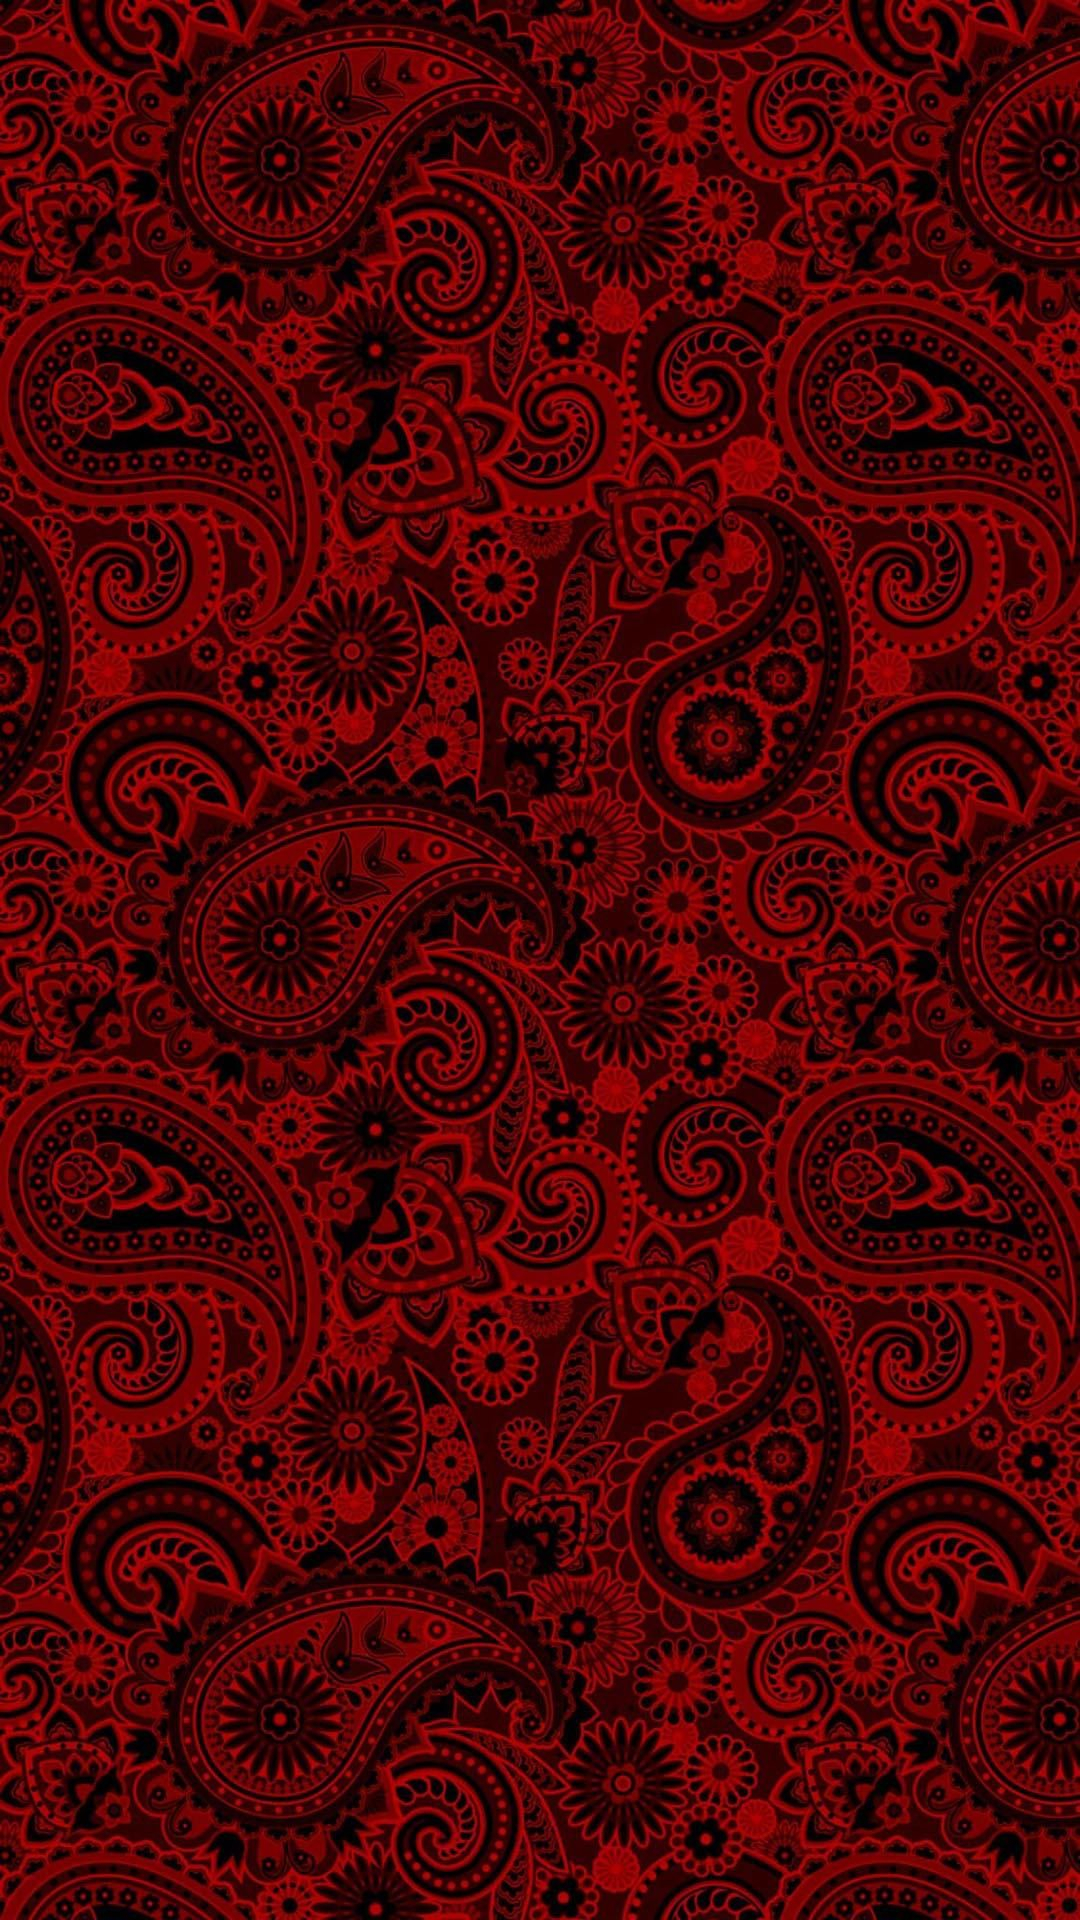 1080x1920 Red Paisley Download at: #iphonewallpaper #pho&acirc;&#128;&brvbar; | Paisley wallpaper, Mandala wallpaper, Dark phone wallpapers